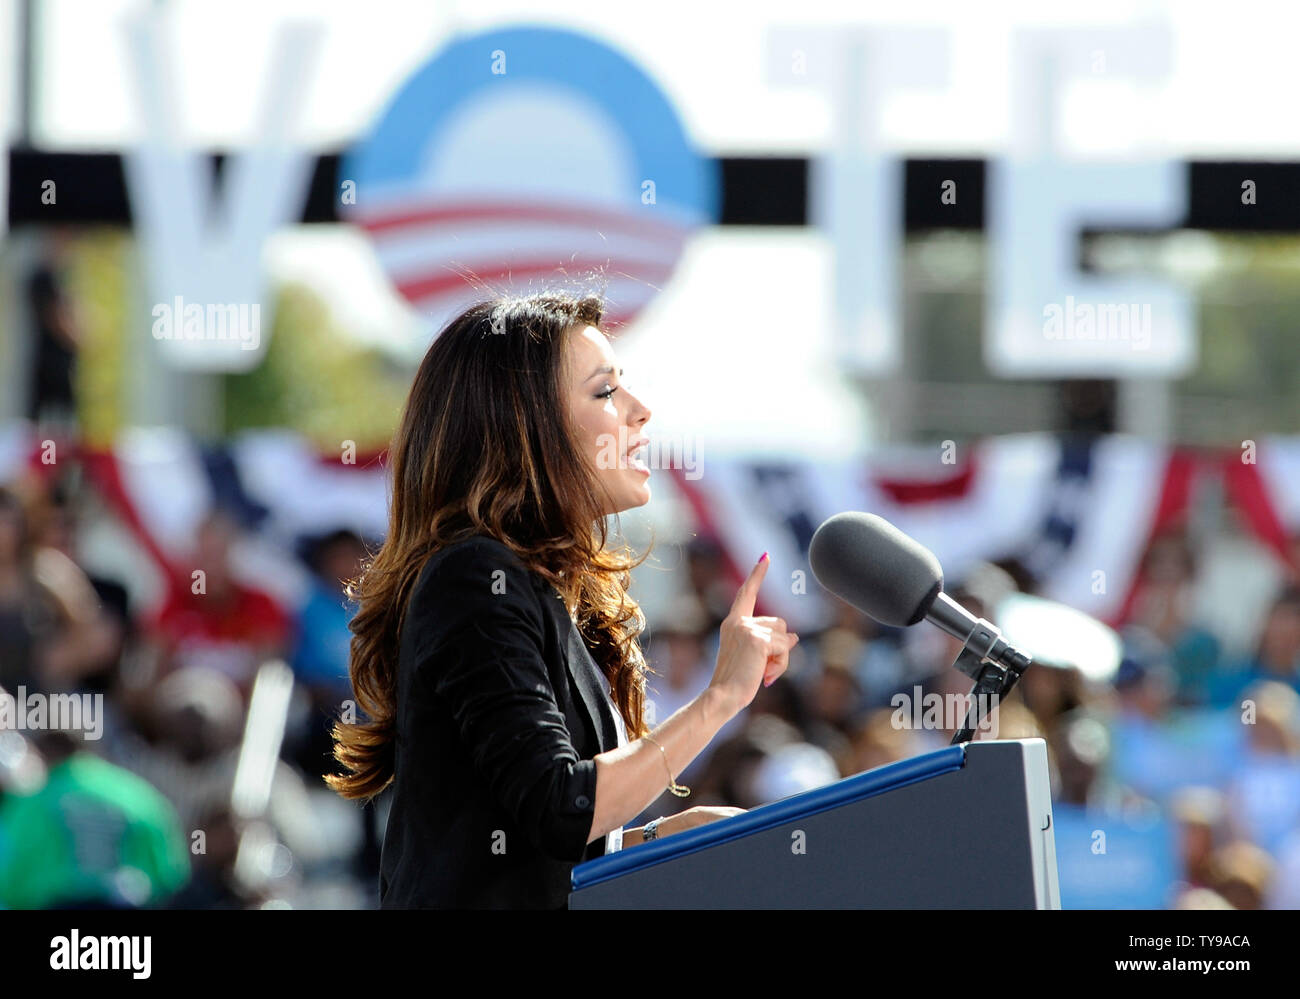 Actress Eva Longoria speaks at a grassroots rally in support of President Barack Obama at the Cheyenne Sports Complex in North Las Vegas, Nevada on November 1, 2012.  UPI/David Becker Stock Photo